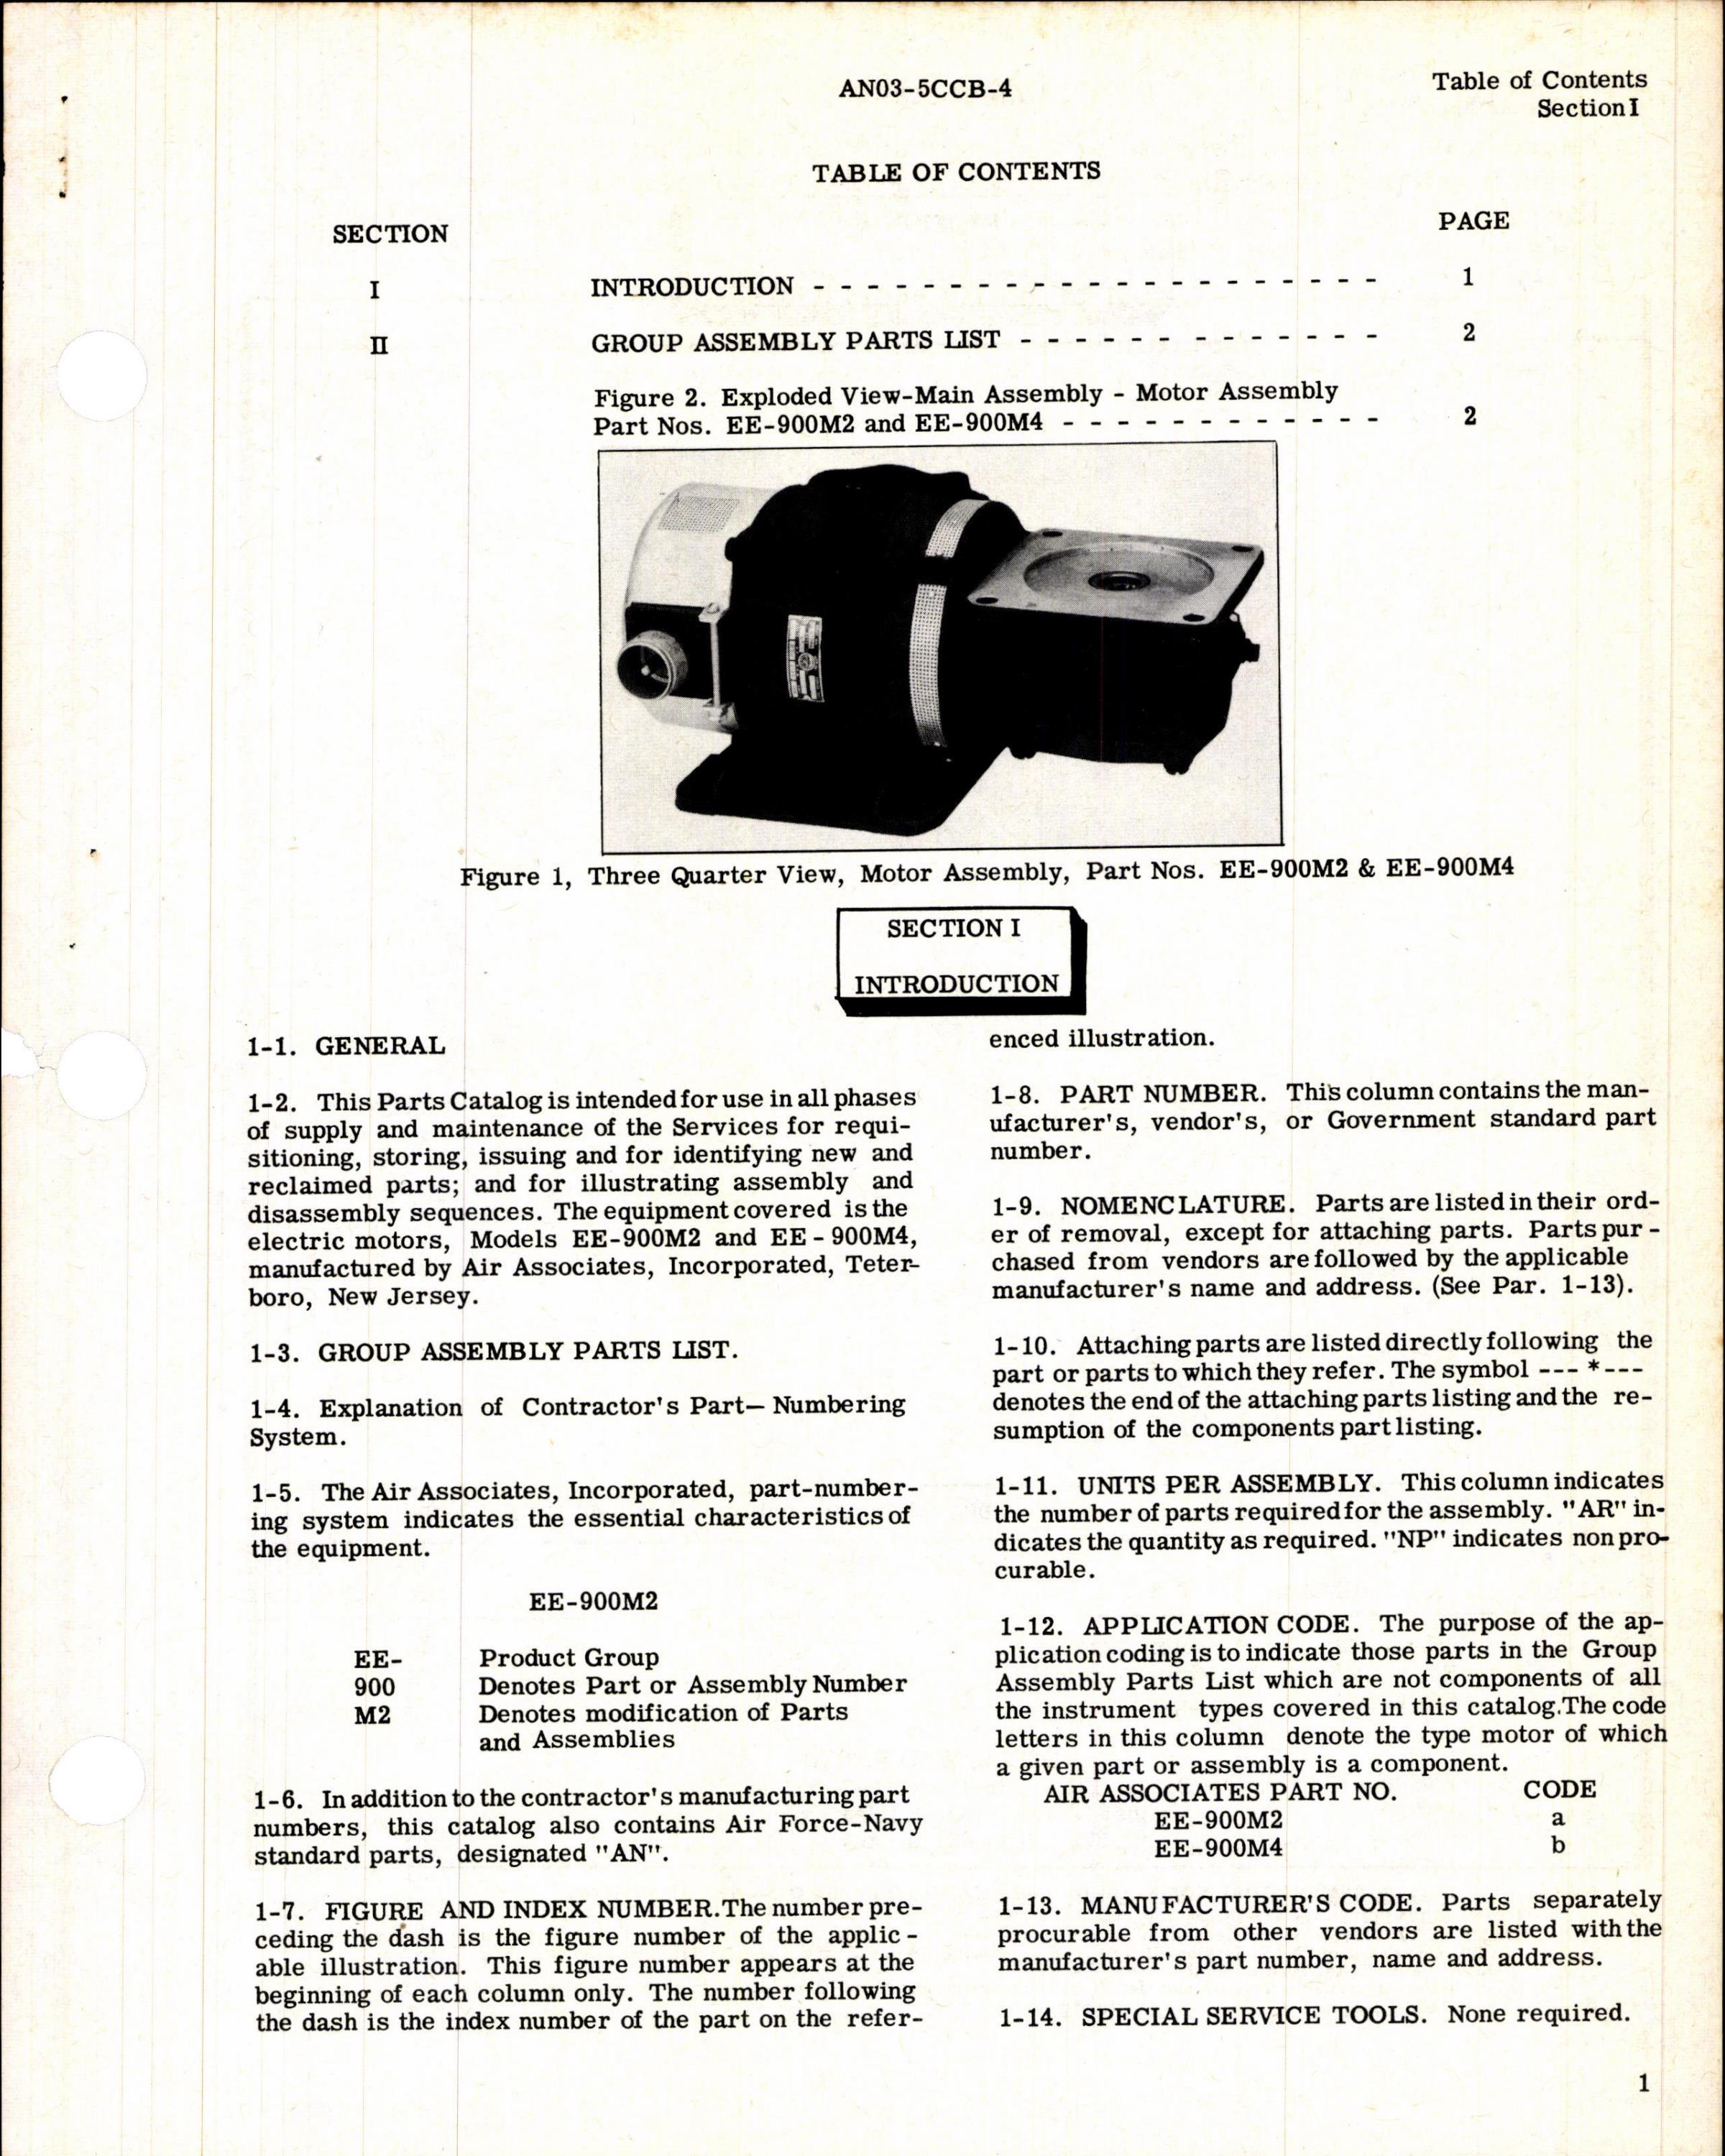 Sample page 5 from AirCorps Library document: Parts Catalog and Overhaul Instructions for Air Associates Electric Motors